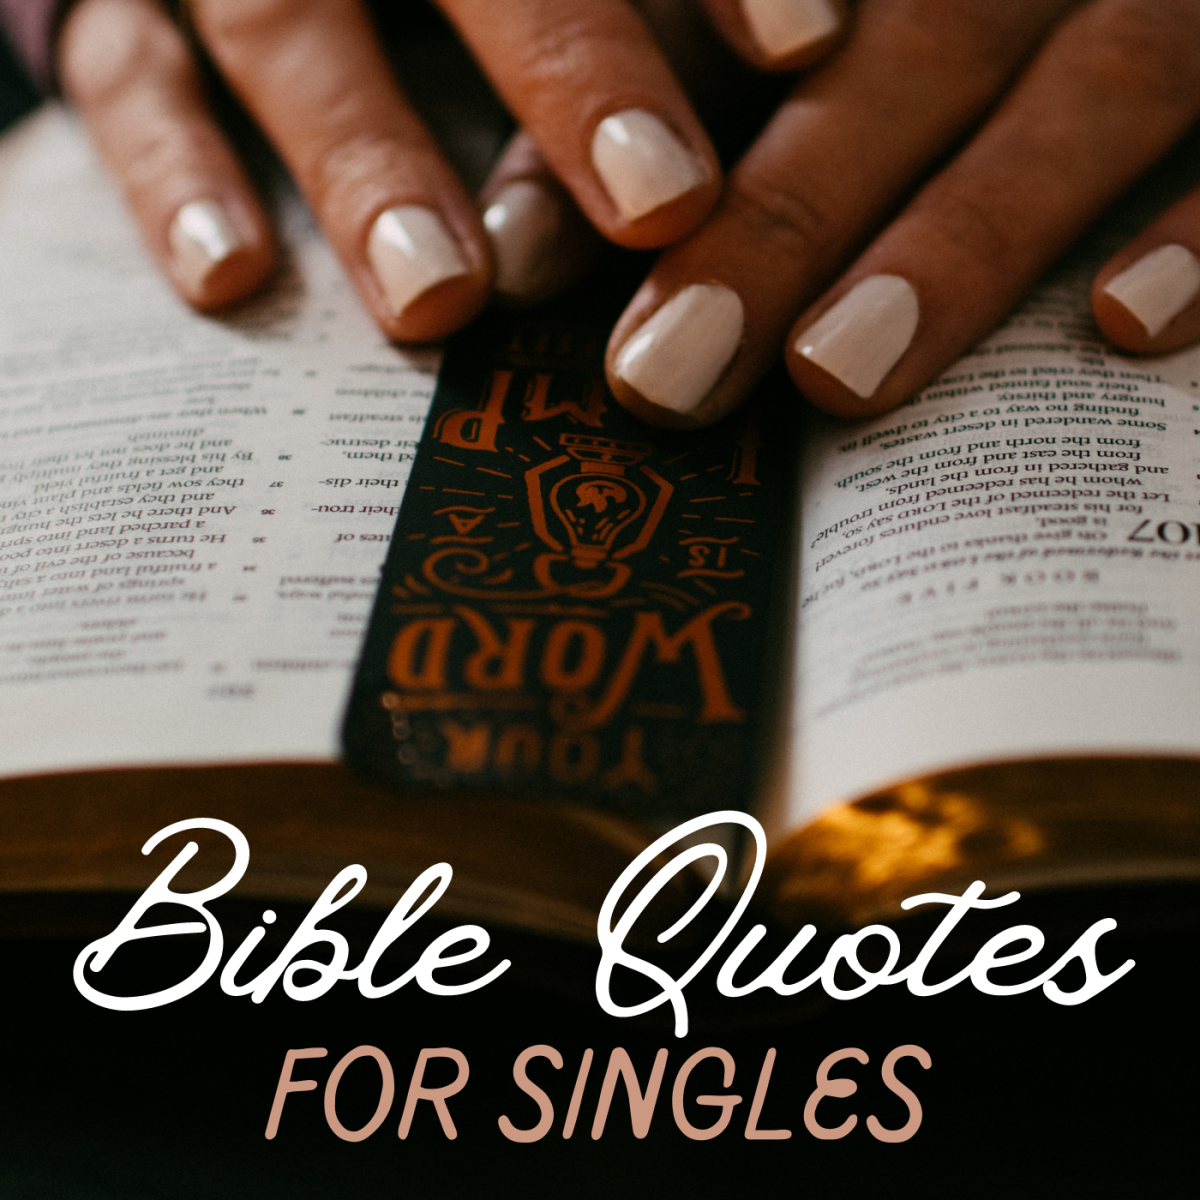 Explore some empowering quotes from the Bible for singles.